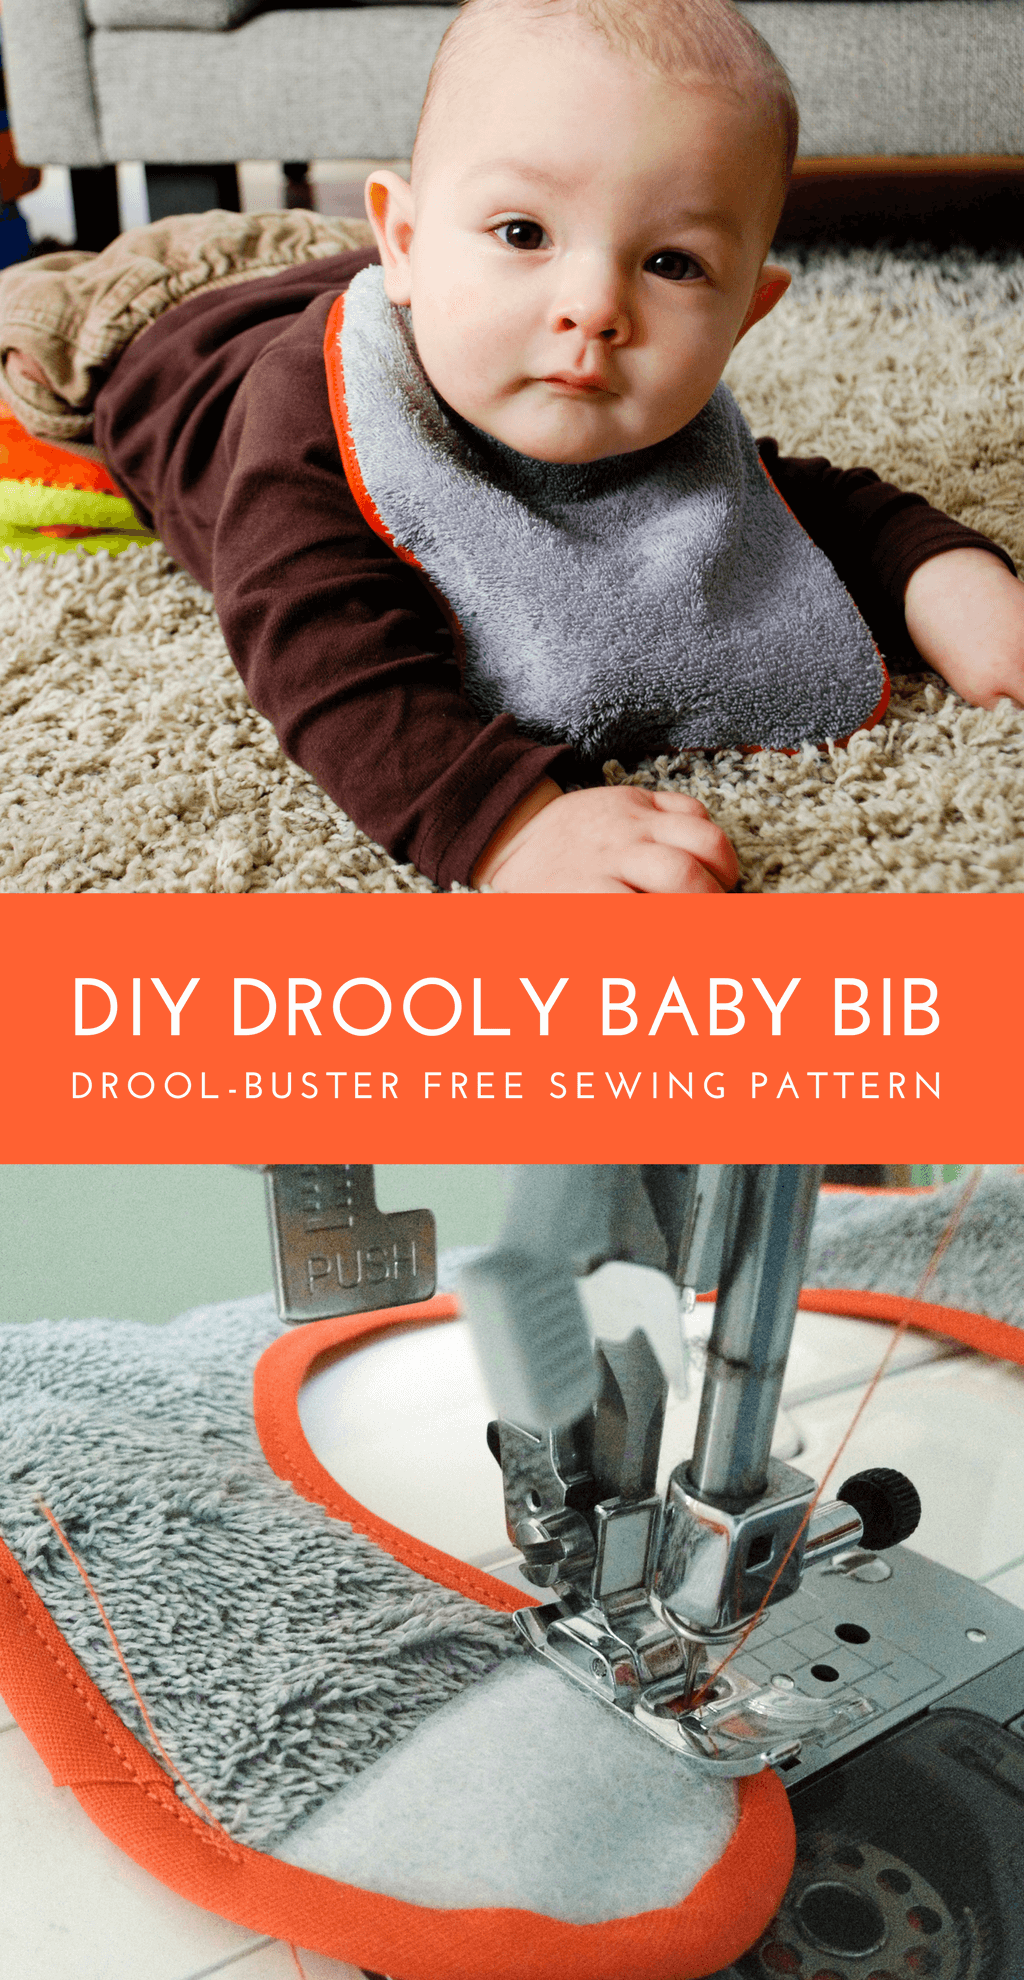 Free Baby Bib Sewing Pattern for drooly babies. Make this DIY drool-proof baby bib lined with waterproof fabric to help keep baby's clothes and skin dry while teething for less chapping. #sewing #freesewingpattern #sewingpattern #babybib #diybabygift